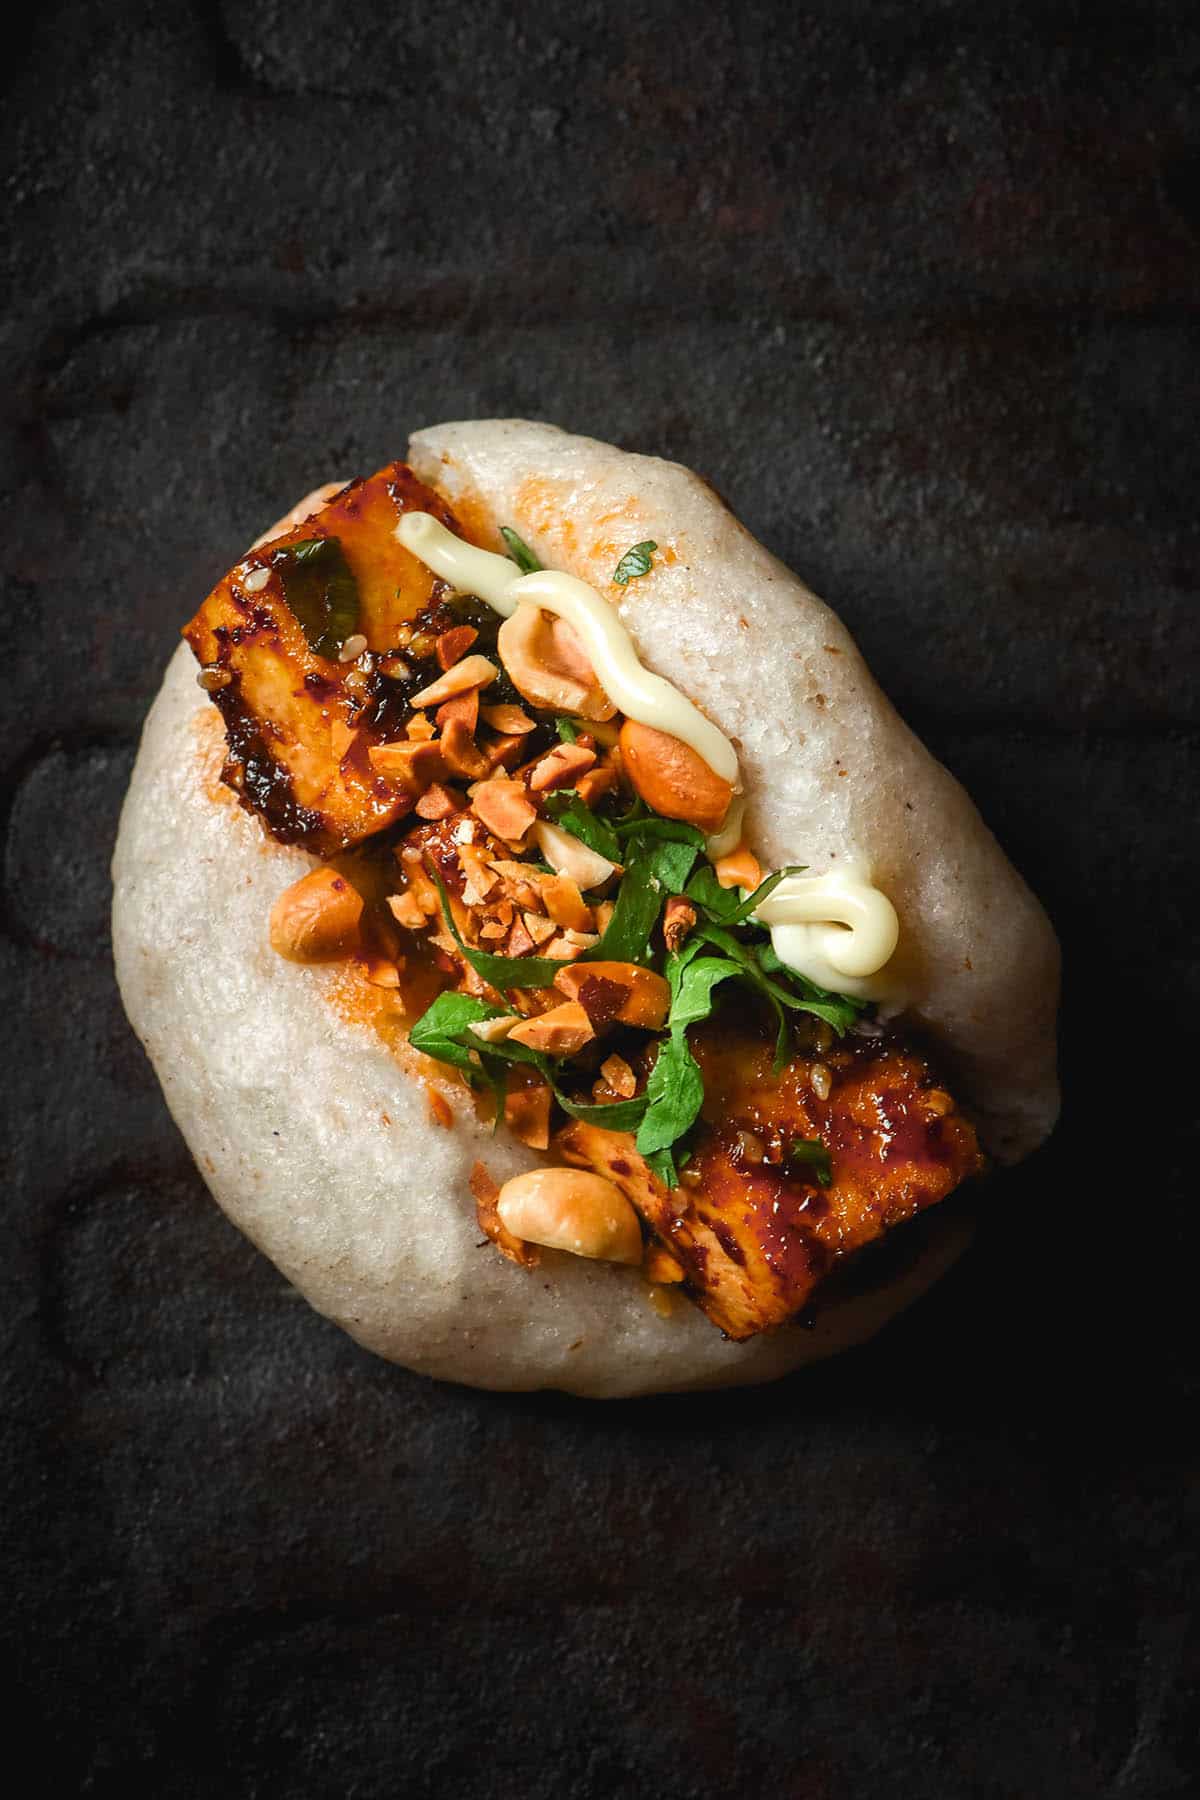 An aerial image of a gluten free bao bun on a dark steel plate. The bao bun is topped with chilli tofu, coriander, peanuts and a squeeze of kewpie mayonnaise